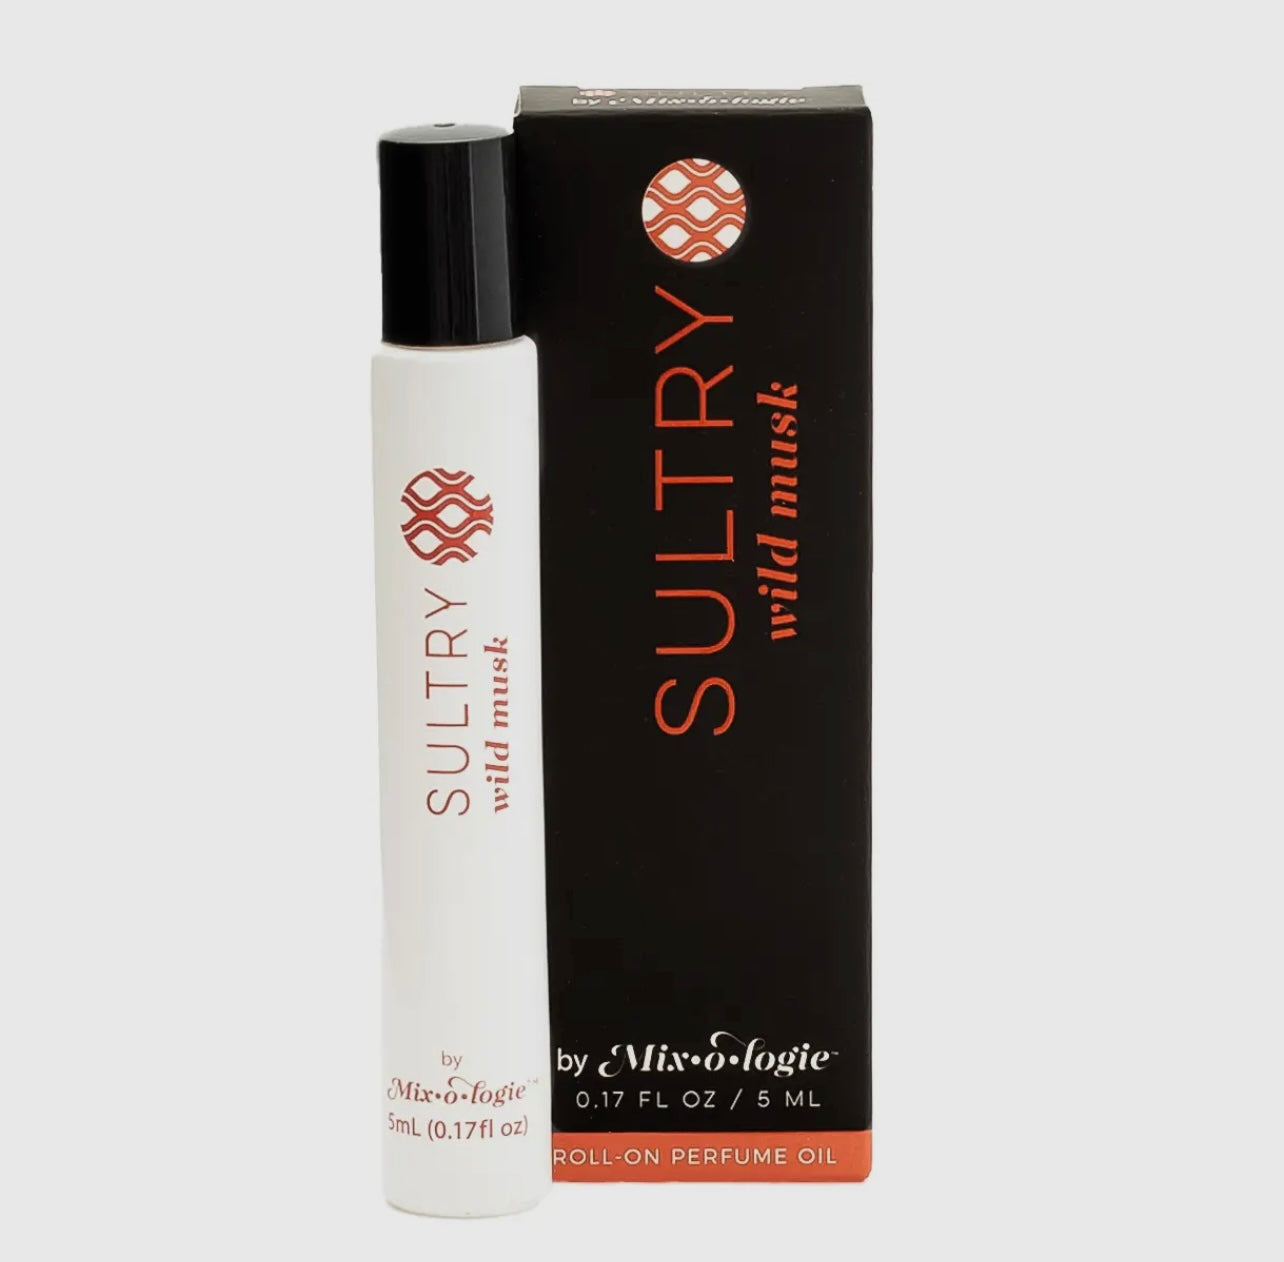 Sultry - Perfume Oil Rollerball - 5mL